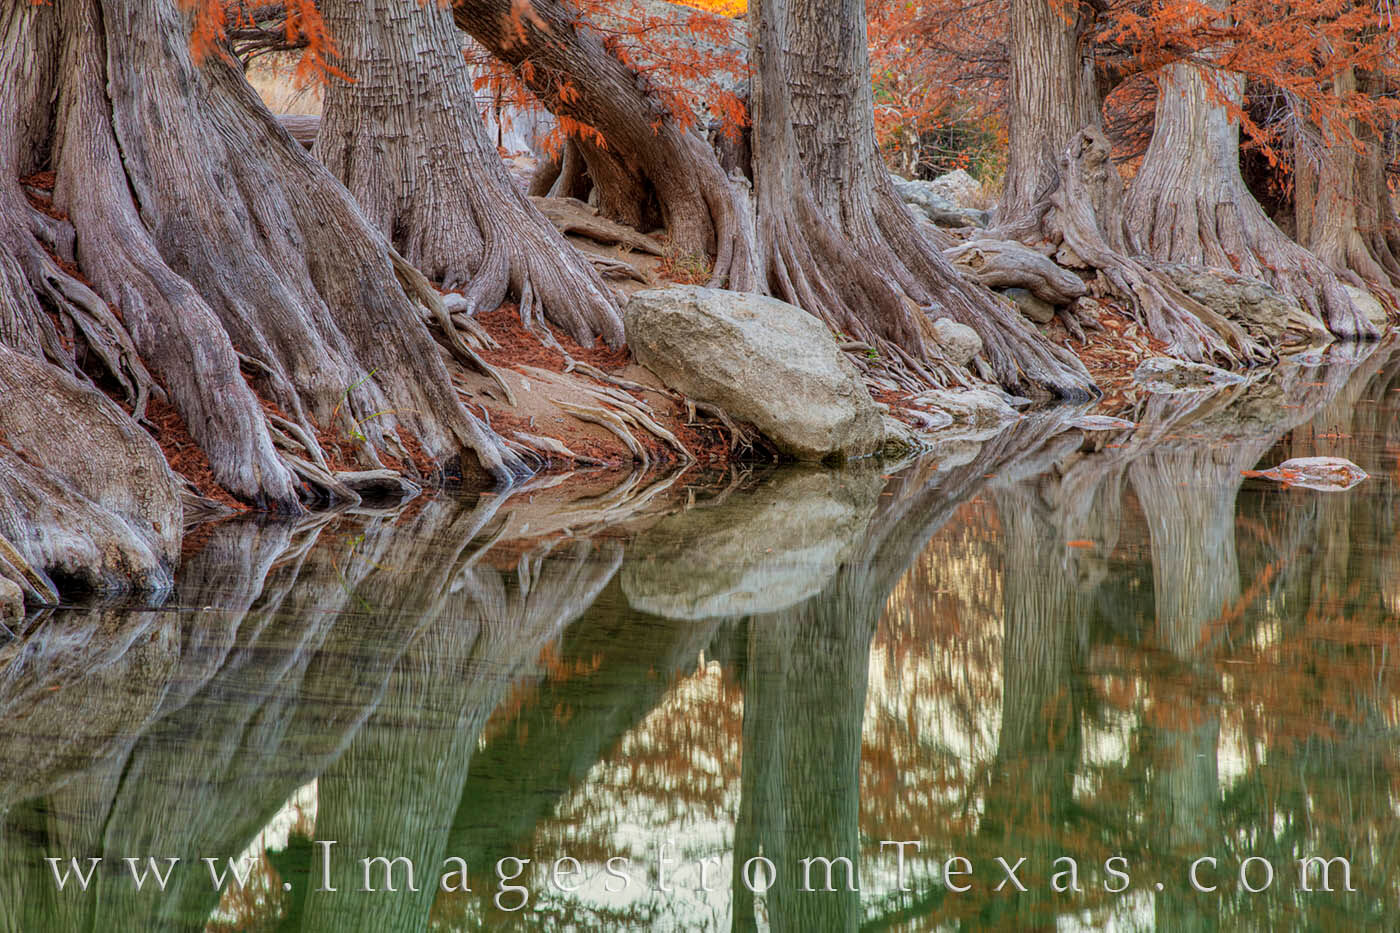 Cypress and their gnarled roots rest along the banks of the Pedernales River on a late Autumn evening.